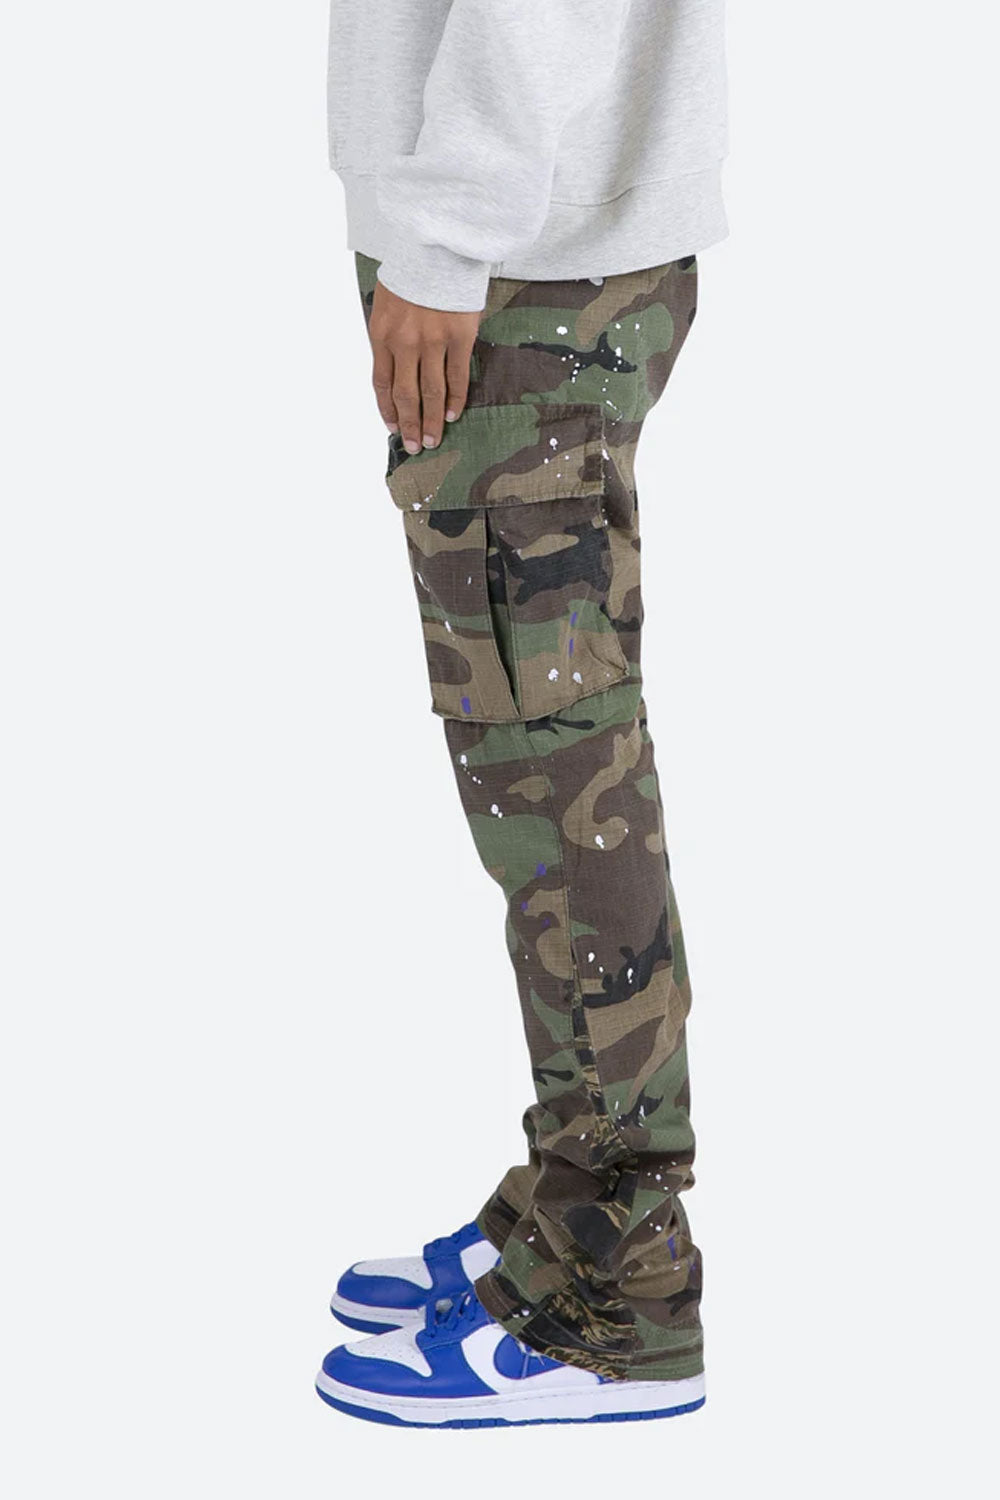 Gingtto Men's Camouflage Casual Cargo Pants Hiking Pants For Men